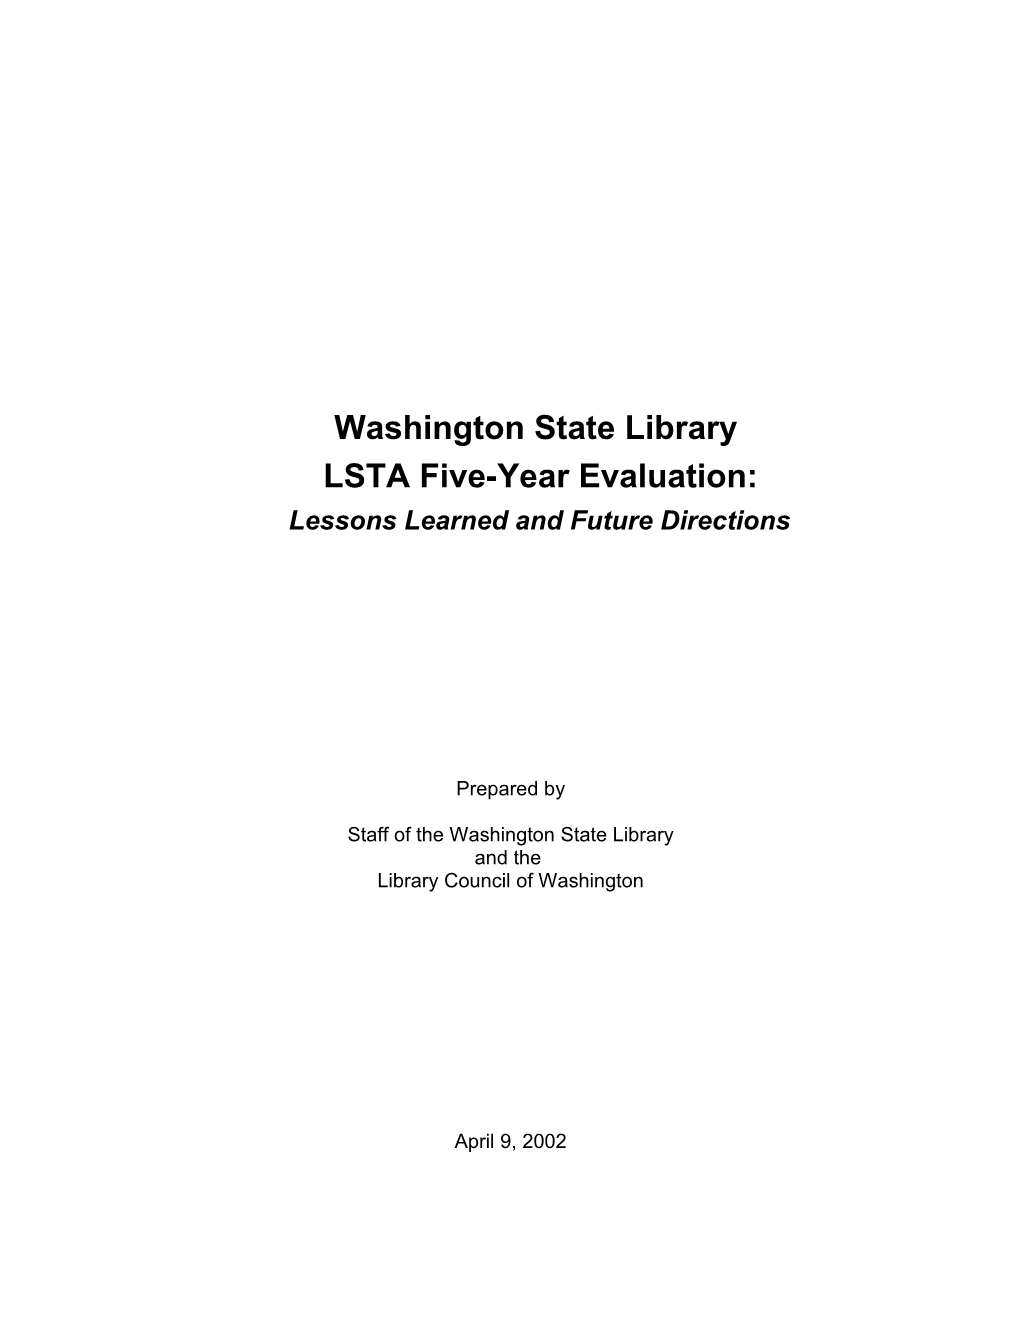 What Is the Process for Determining the Use of LSTA Funds in Washington State